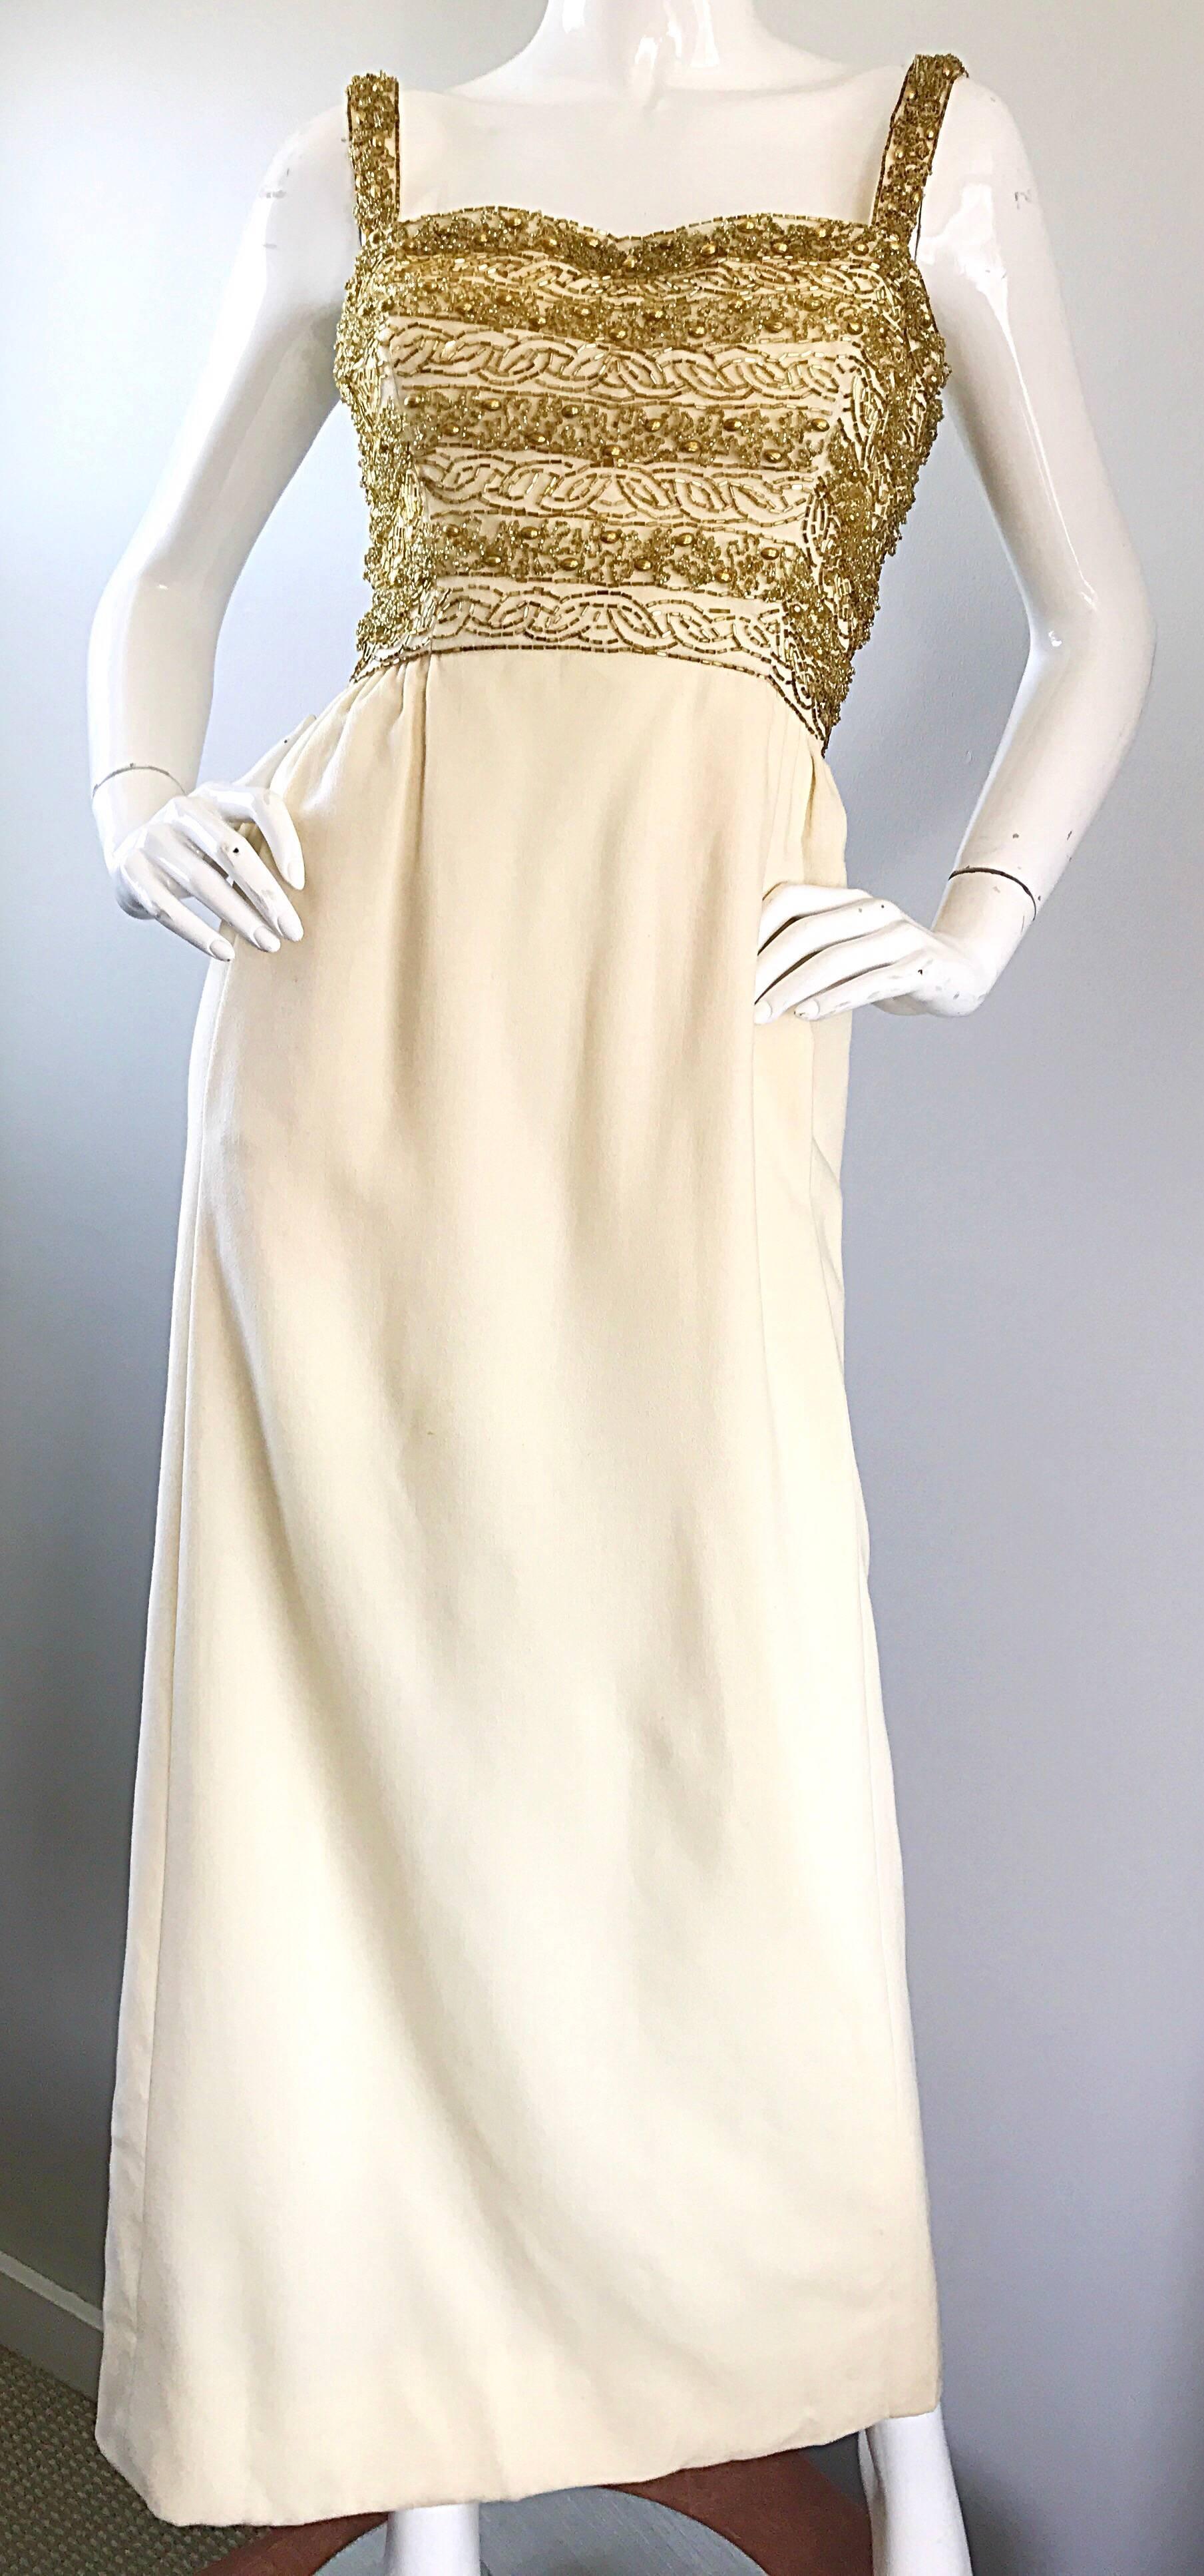 White Gorgeous 1960s Joseph Magnin Ivory + Gold Beaded Vintage 60s Wool Evening Gown